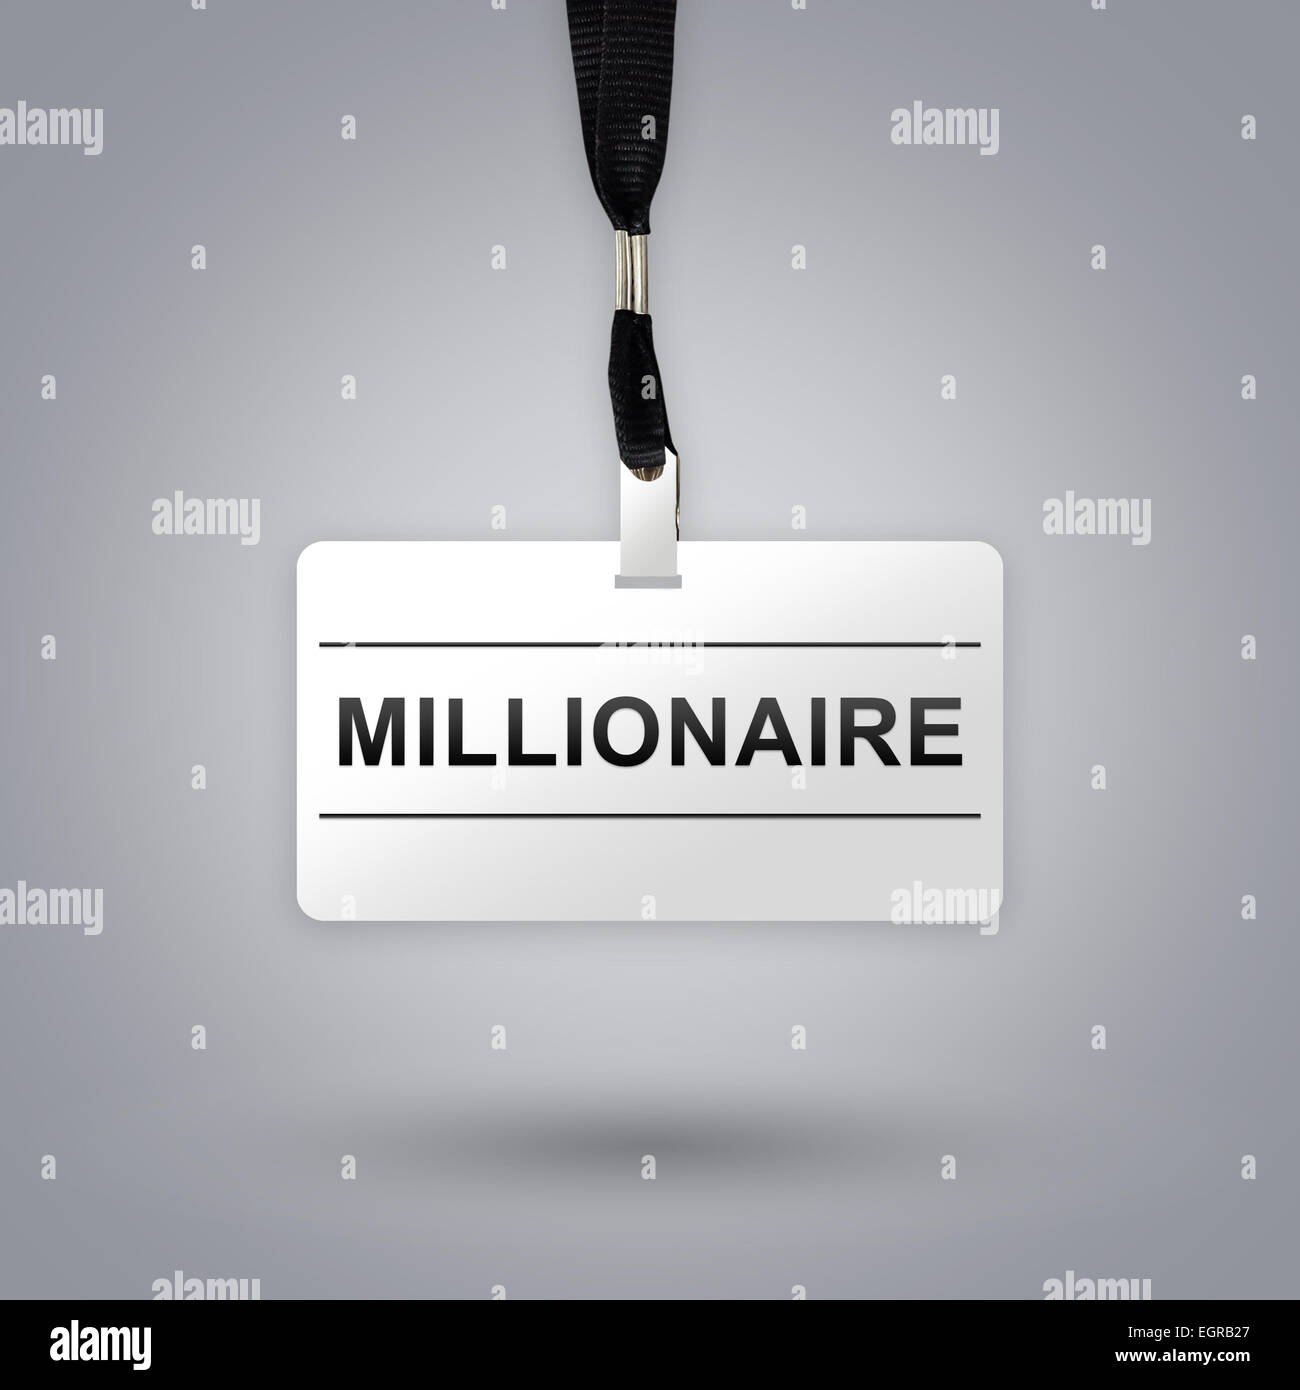 millionaire on badge with grey radial gradient background Stock Photo